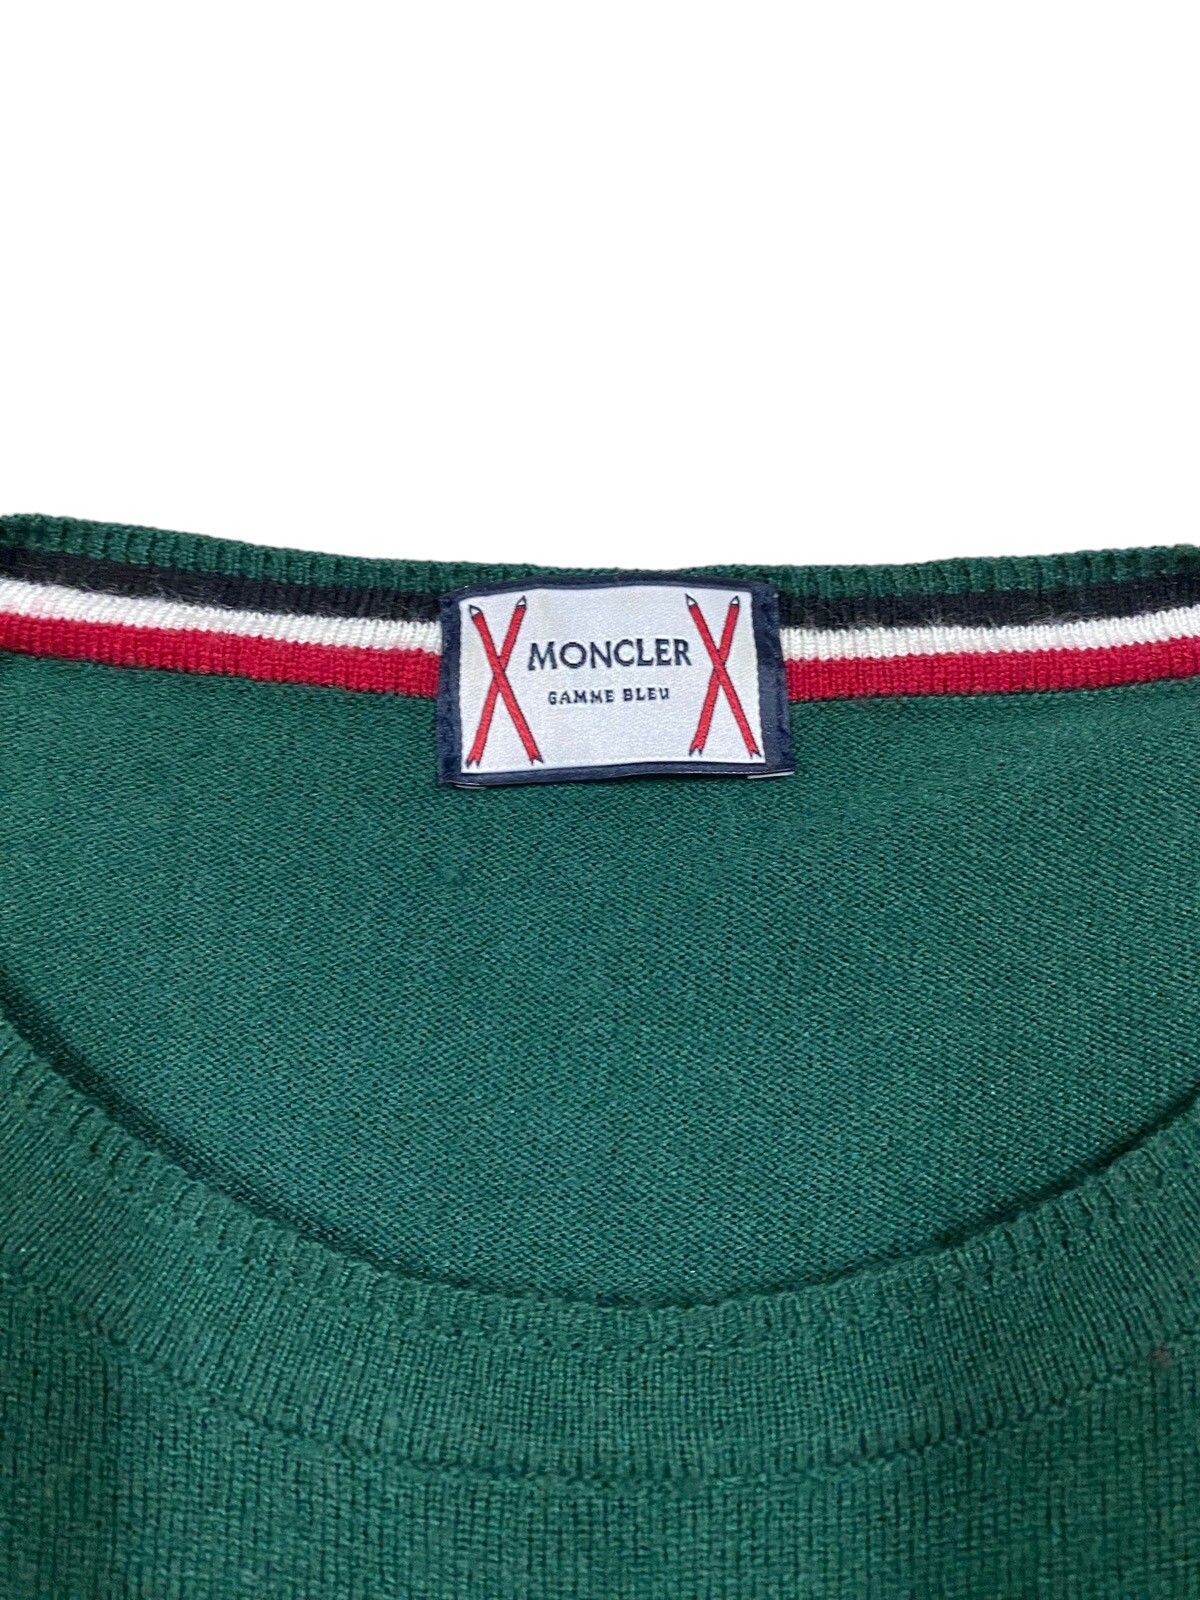 Authentic🔥Moncler Gamme Bleu Jumper Knitted - 5